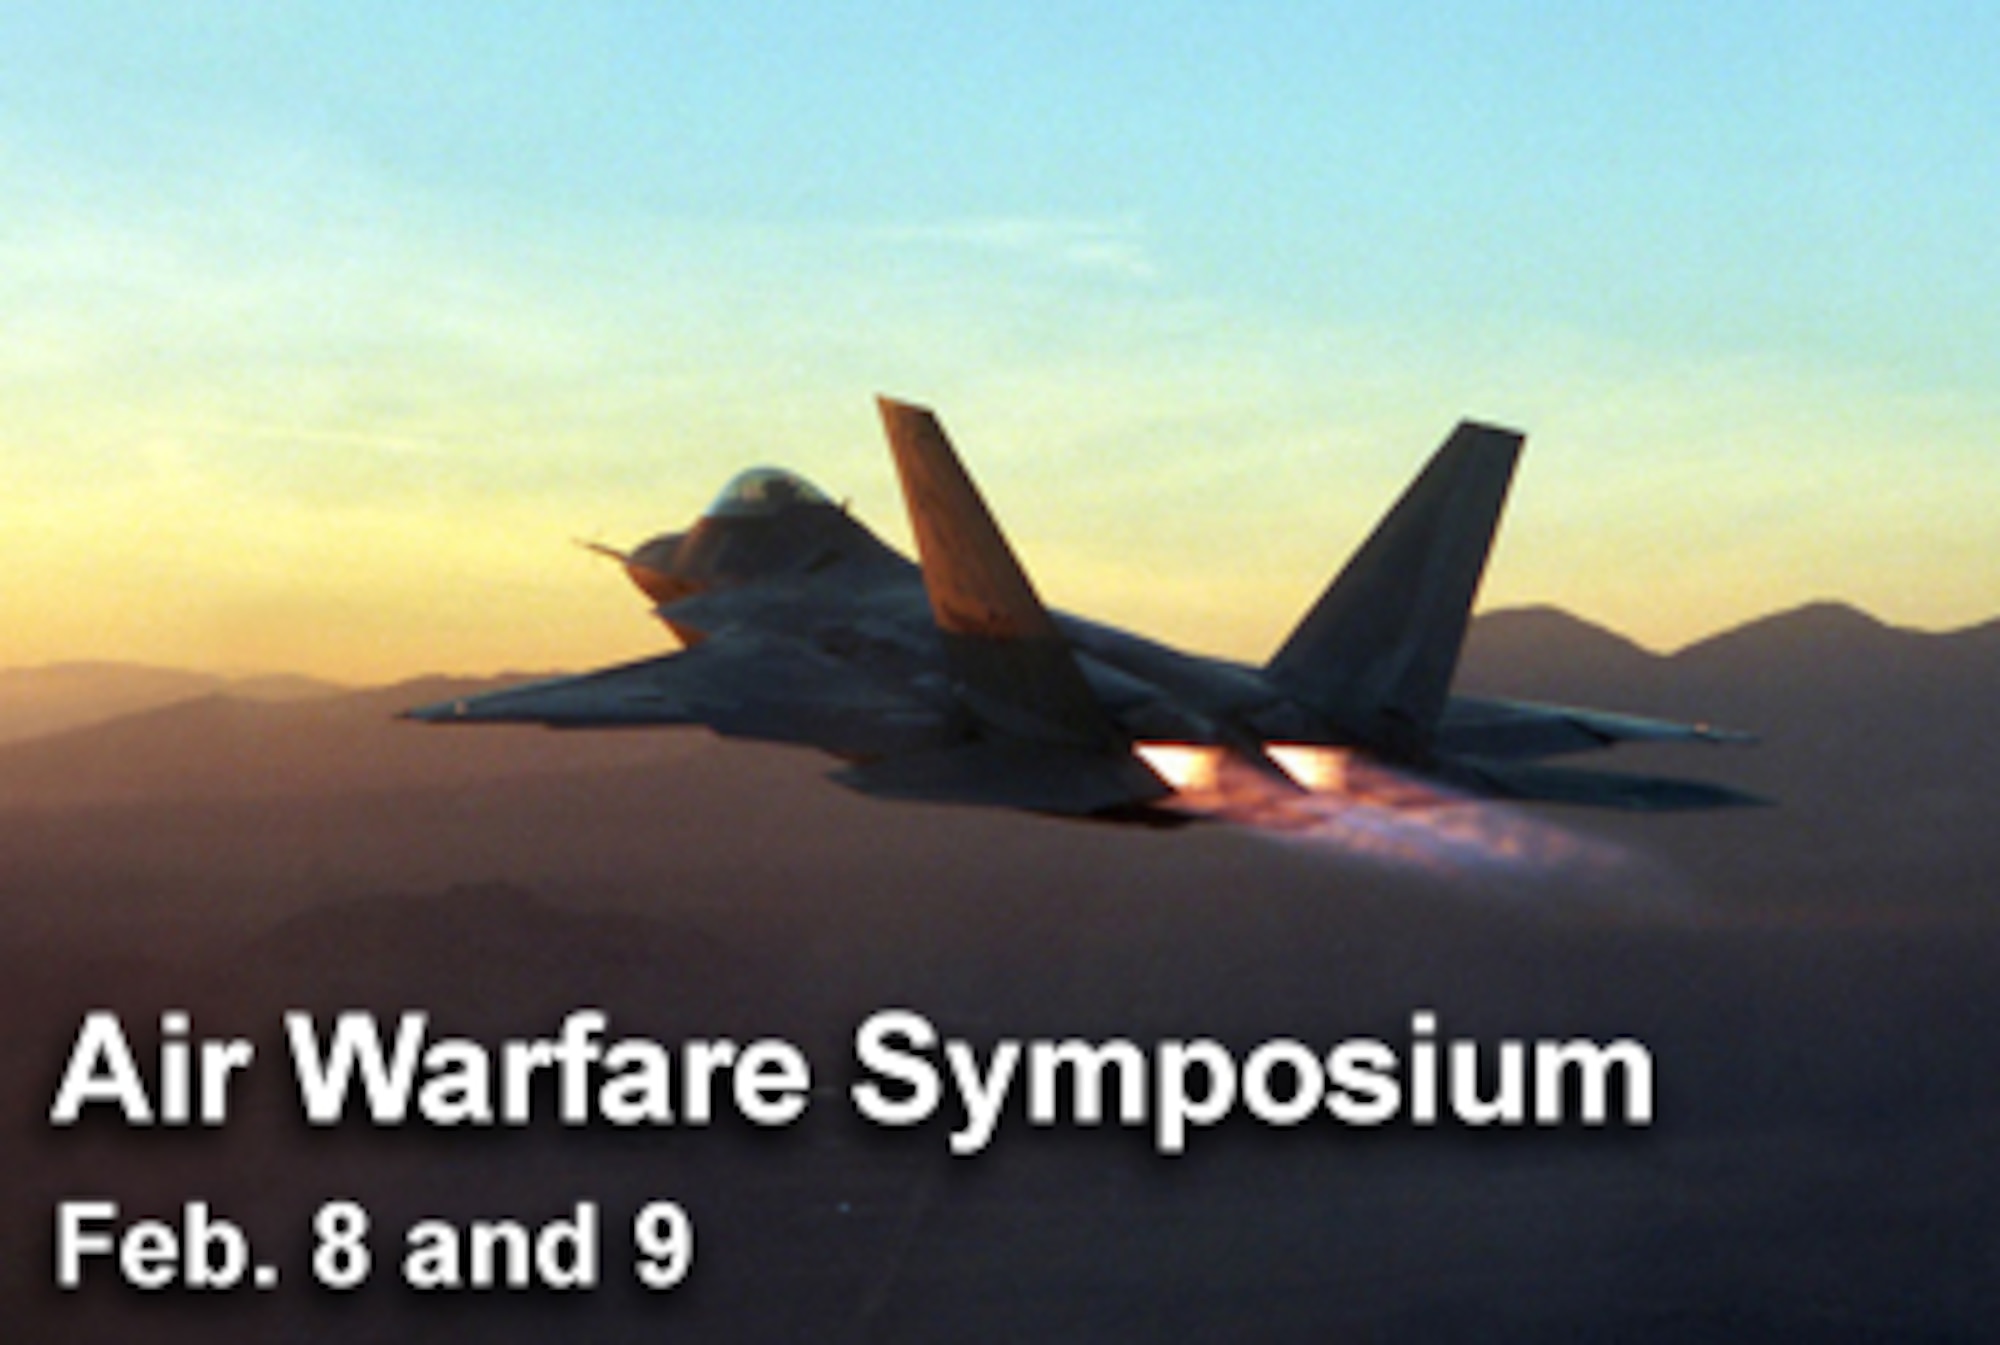 The 23rd Annual Air Warfare Symposium is scheduled for Feb. 8 and 9 in Orlando, Fla., with a theme for this year's symposioum of "Striking the Balance: Today's War, Tomorrow's Threats, Future Technology." (U.S. Air Force photo illustration)